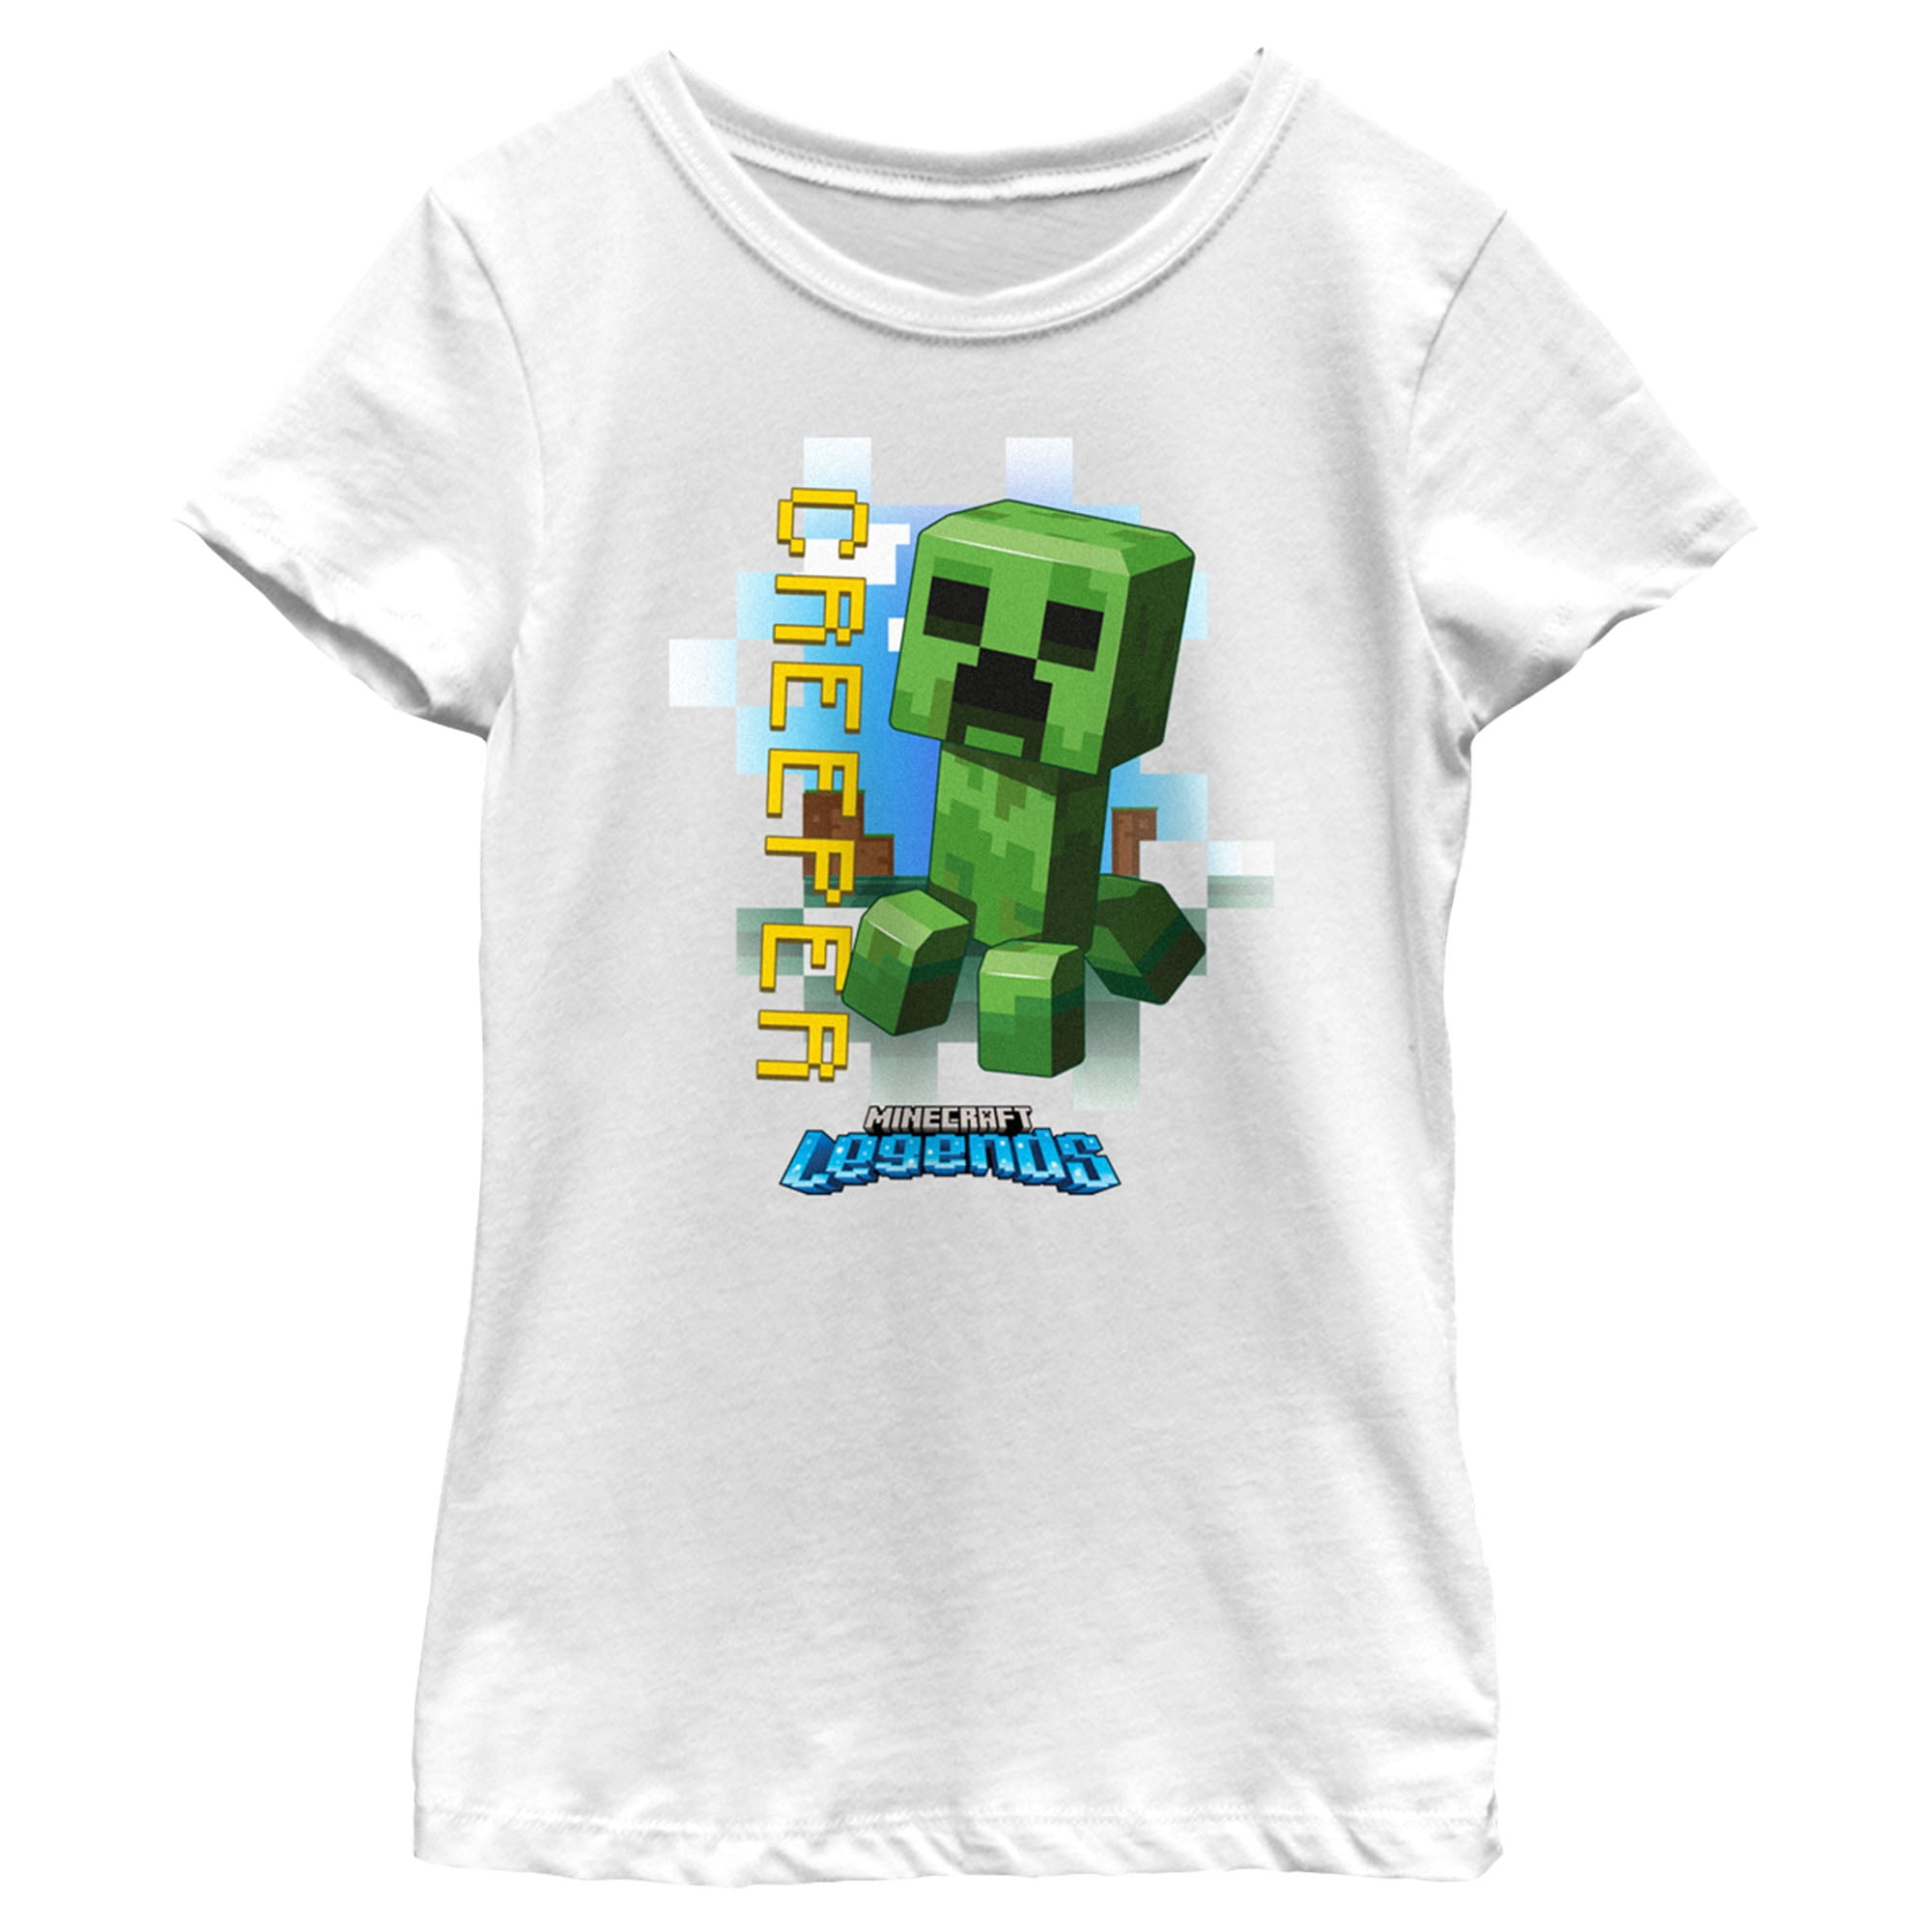 Girl's Minecraft Creeper Face T-Shirt - Green Apple - Large